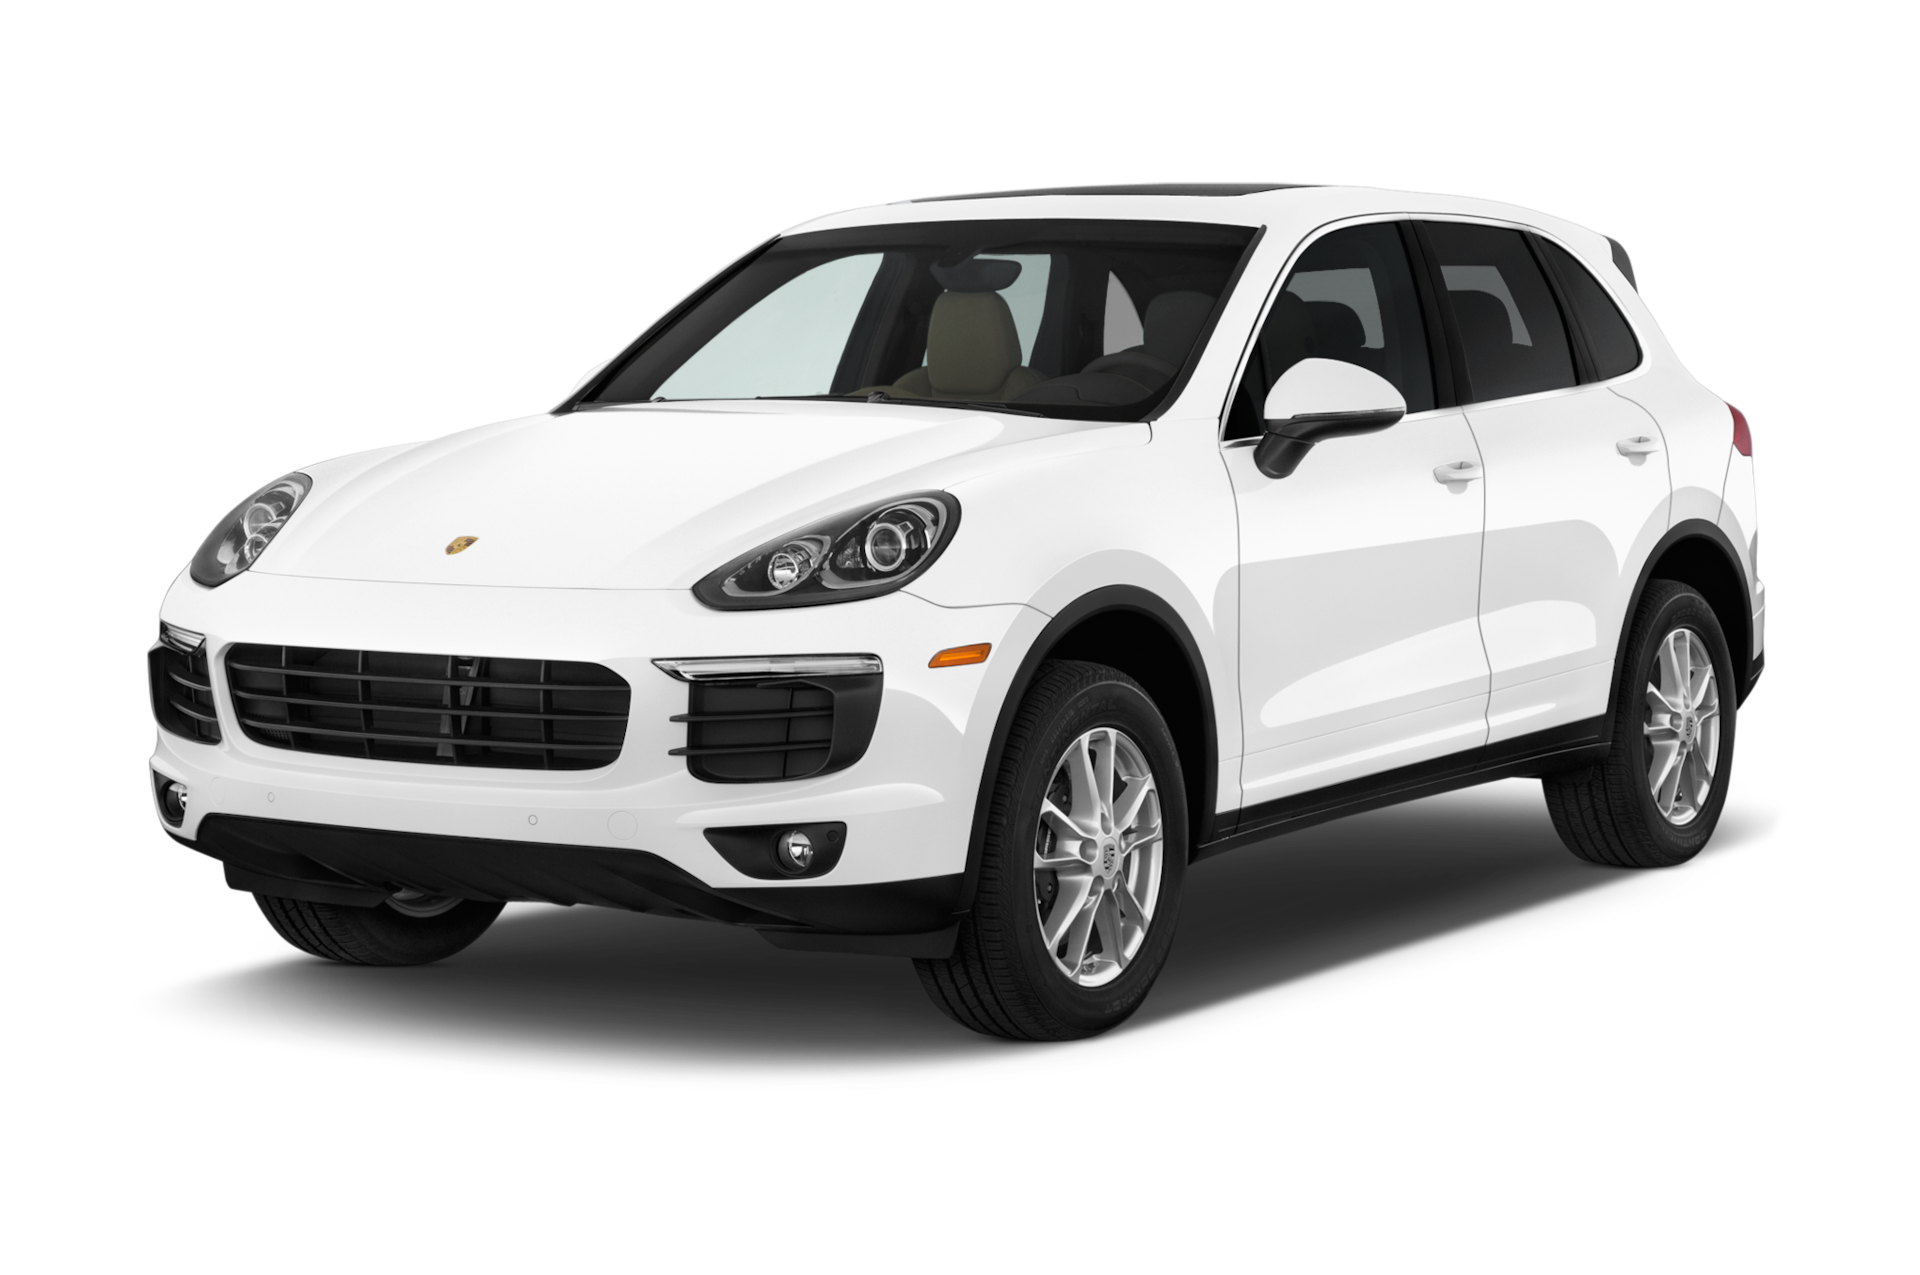 2018 Porsche Cayenne Prices, Reviews, and Photos - MotorTrend